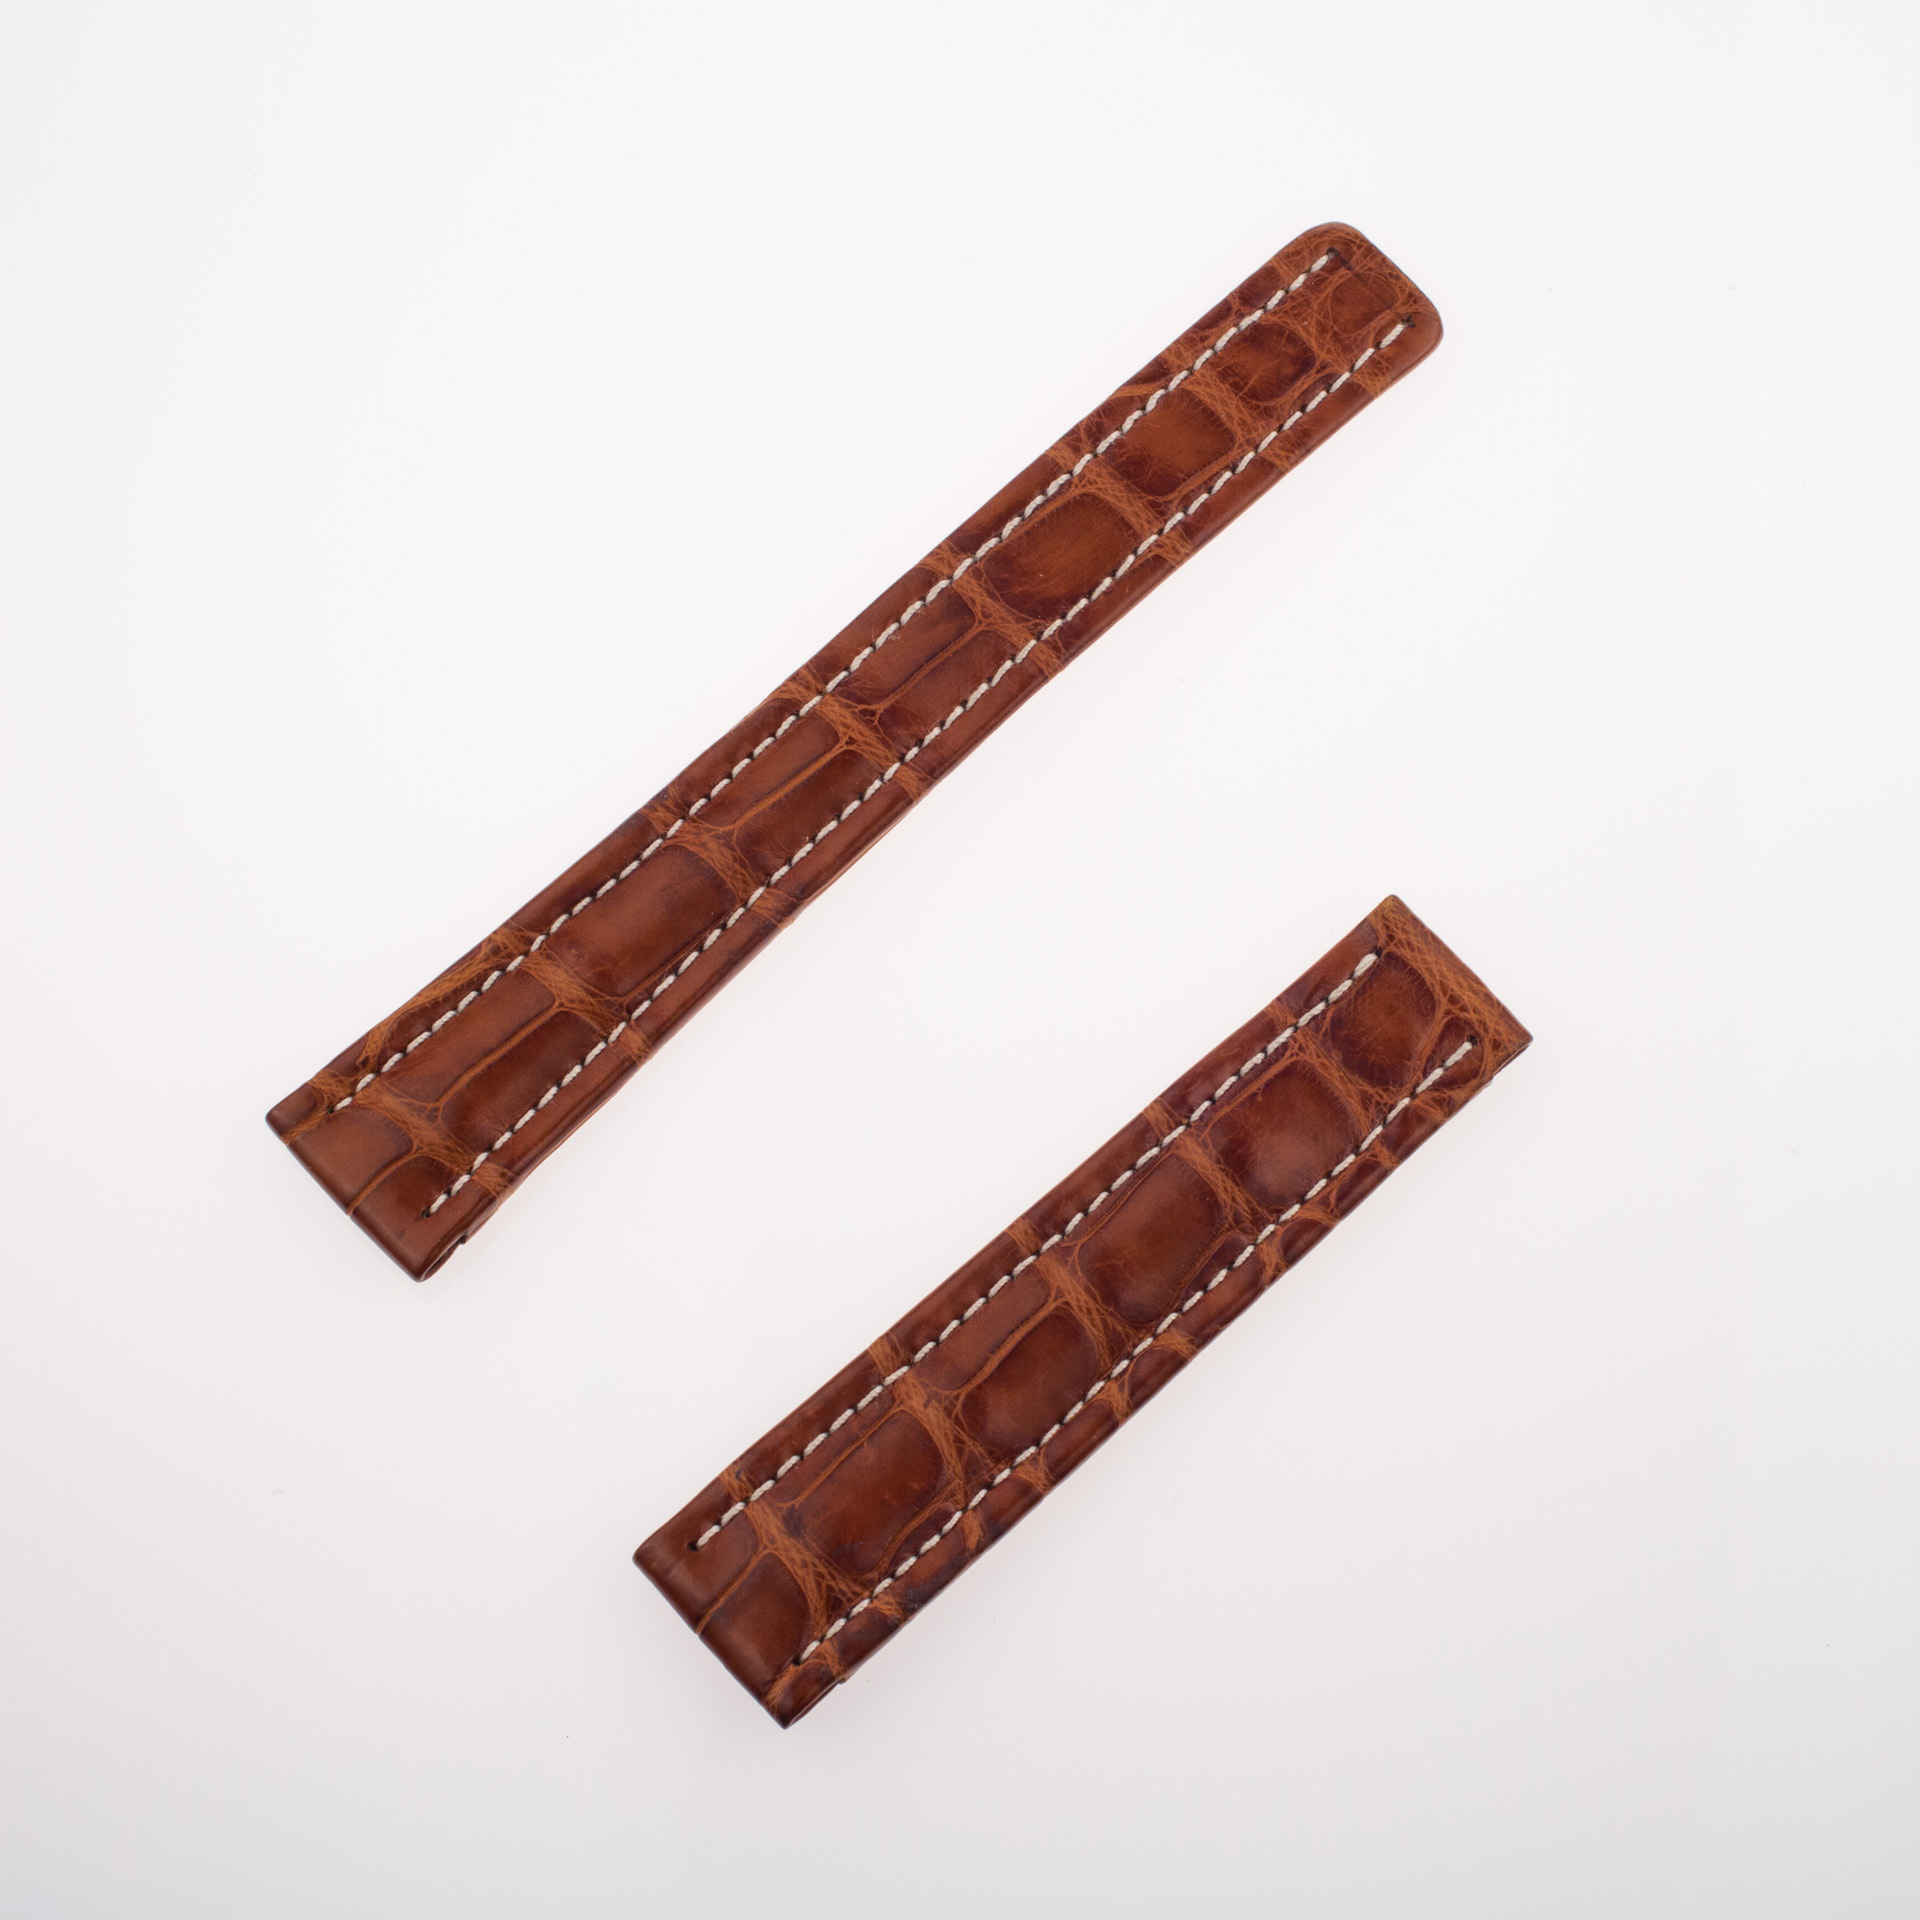 Breitling brown alligator strap with white stitches (18mm x 16mm) image 1